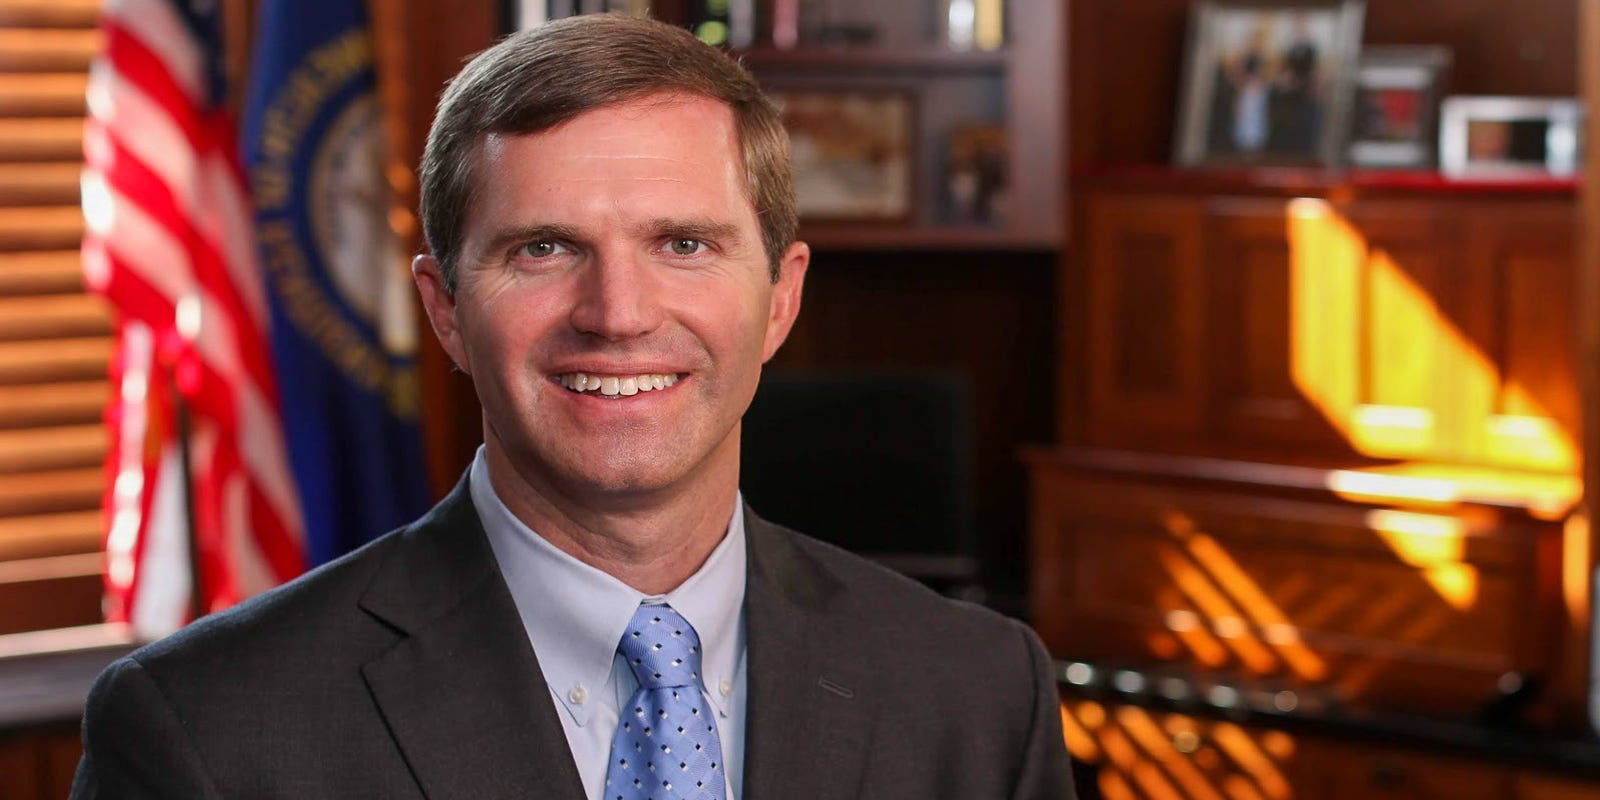 Kentucky governor race Andy Beshear endorsed by The Courier Journal